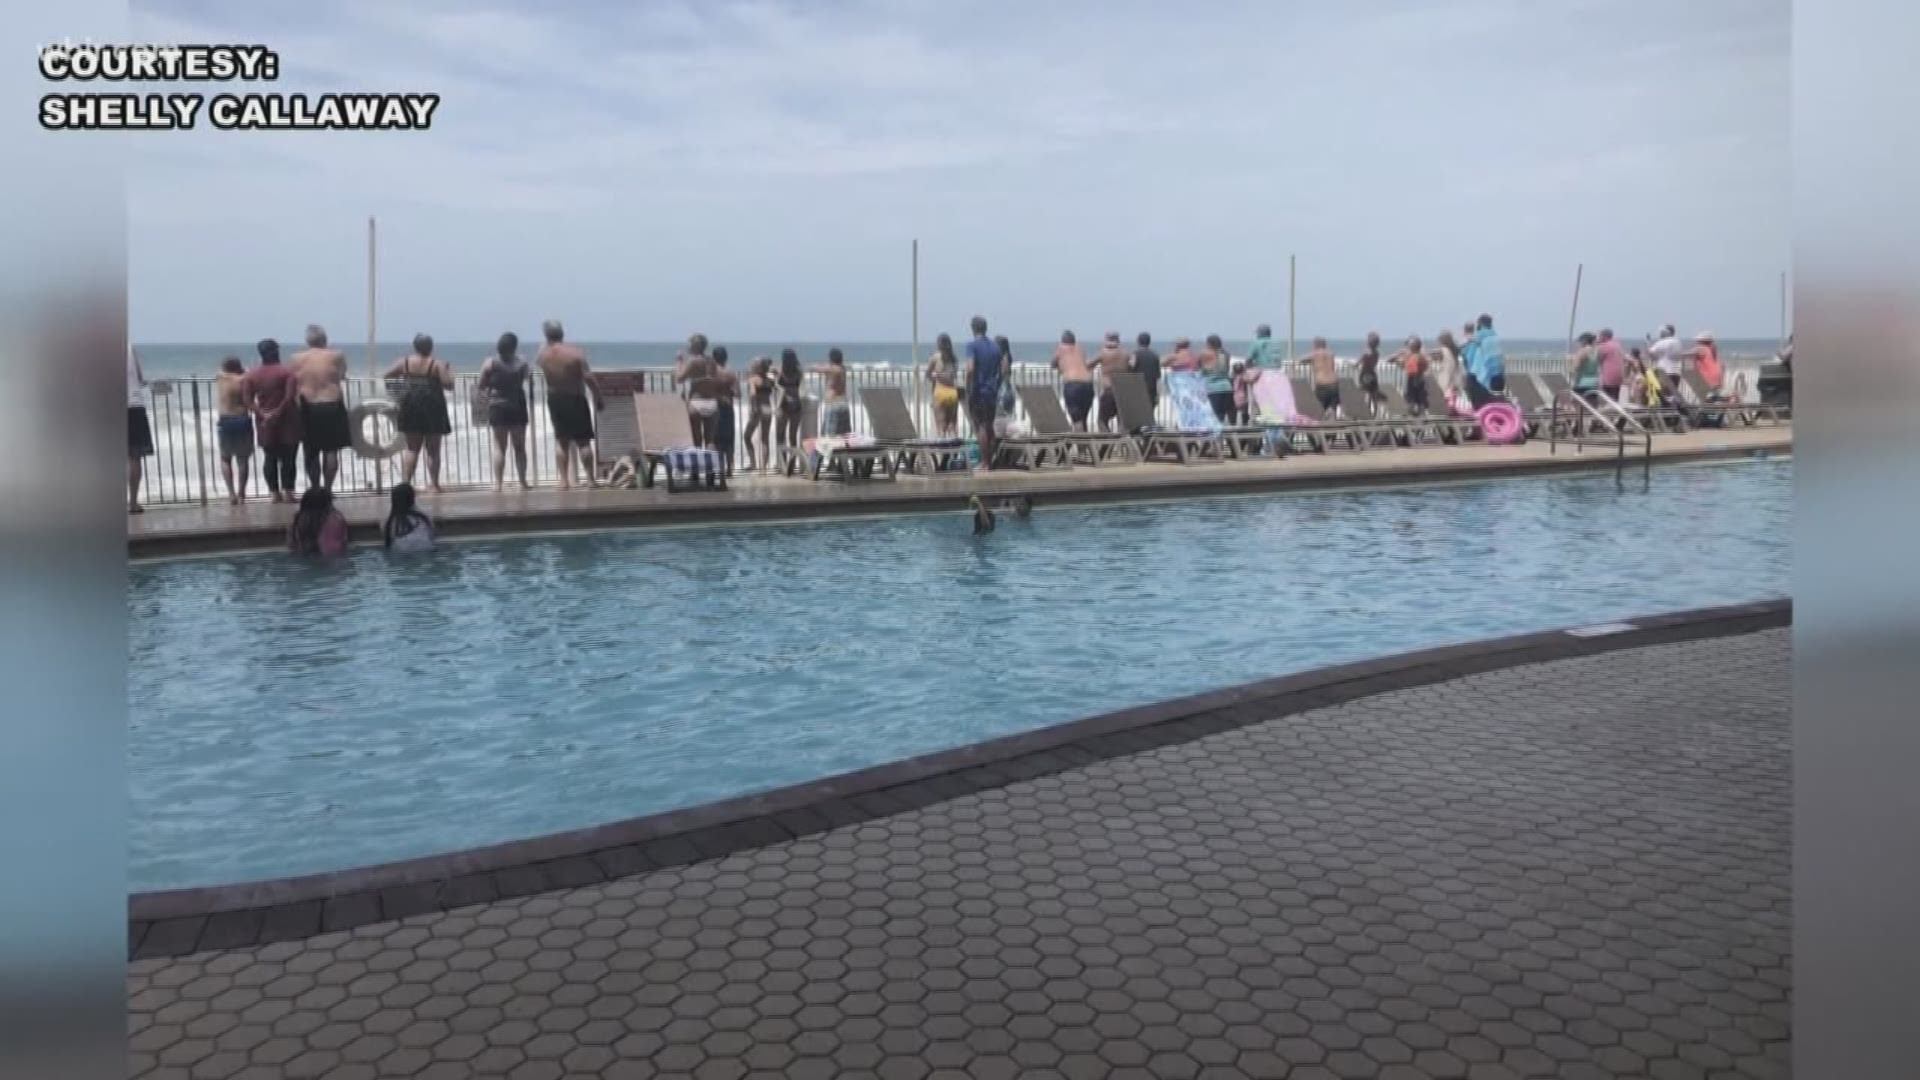 Dozens locked arms, creating a human chain to save two swimmers caught in rip currents at Panama City Beach over the weekend. An East Tennessee man said no one knew each other, but they worked together quickly to save lives.